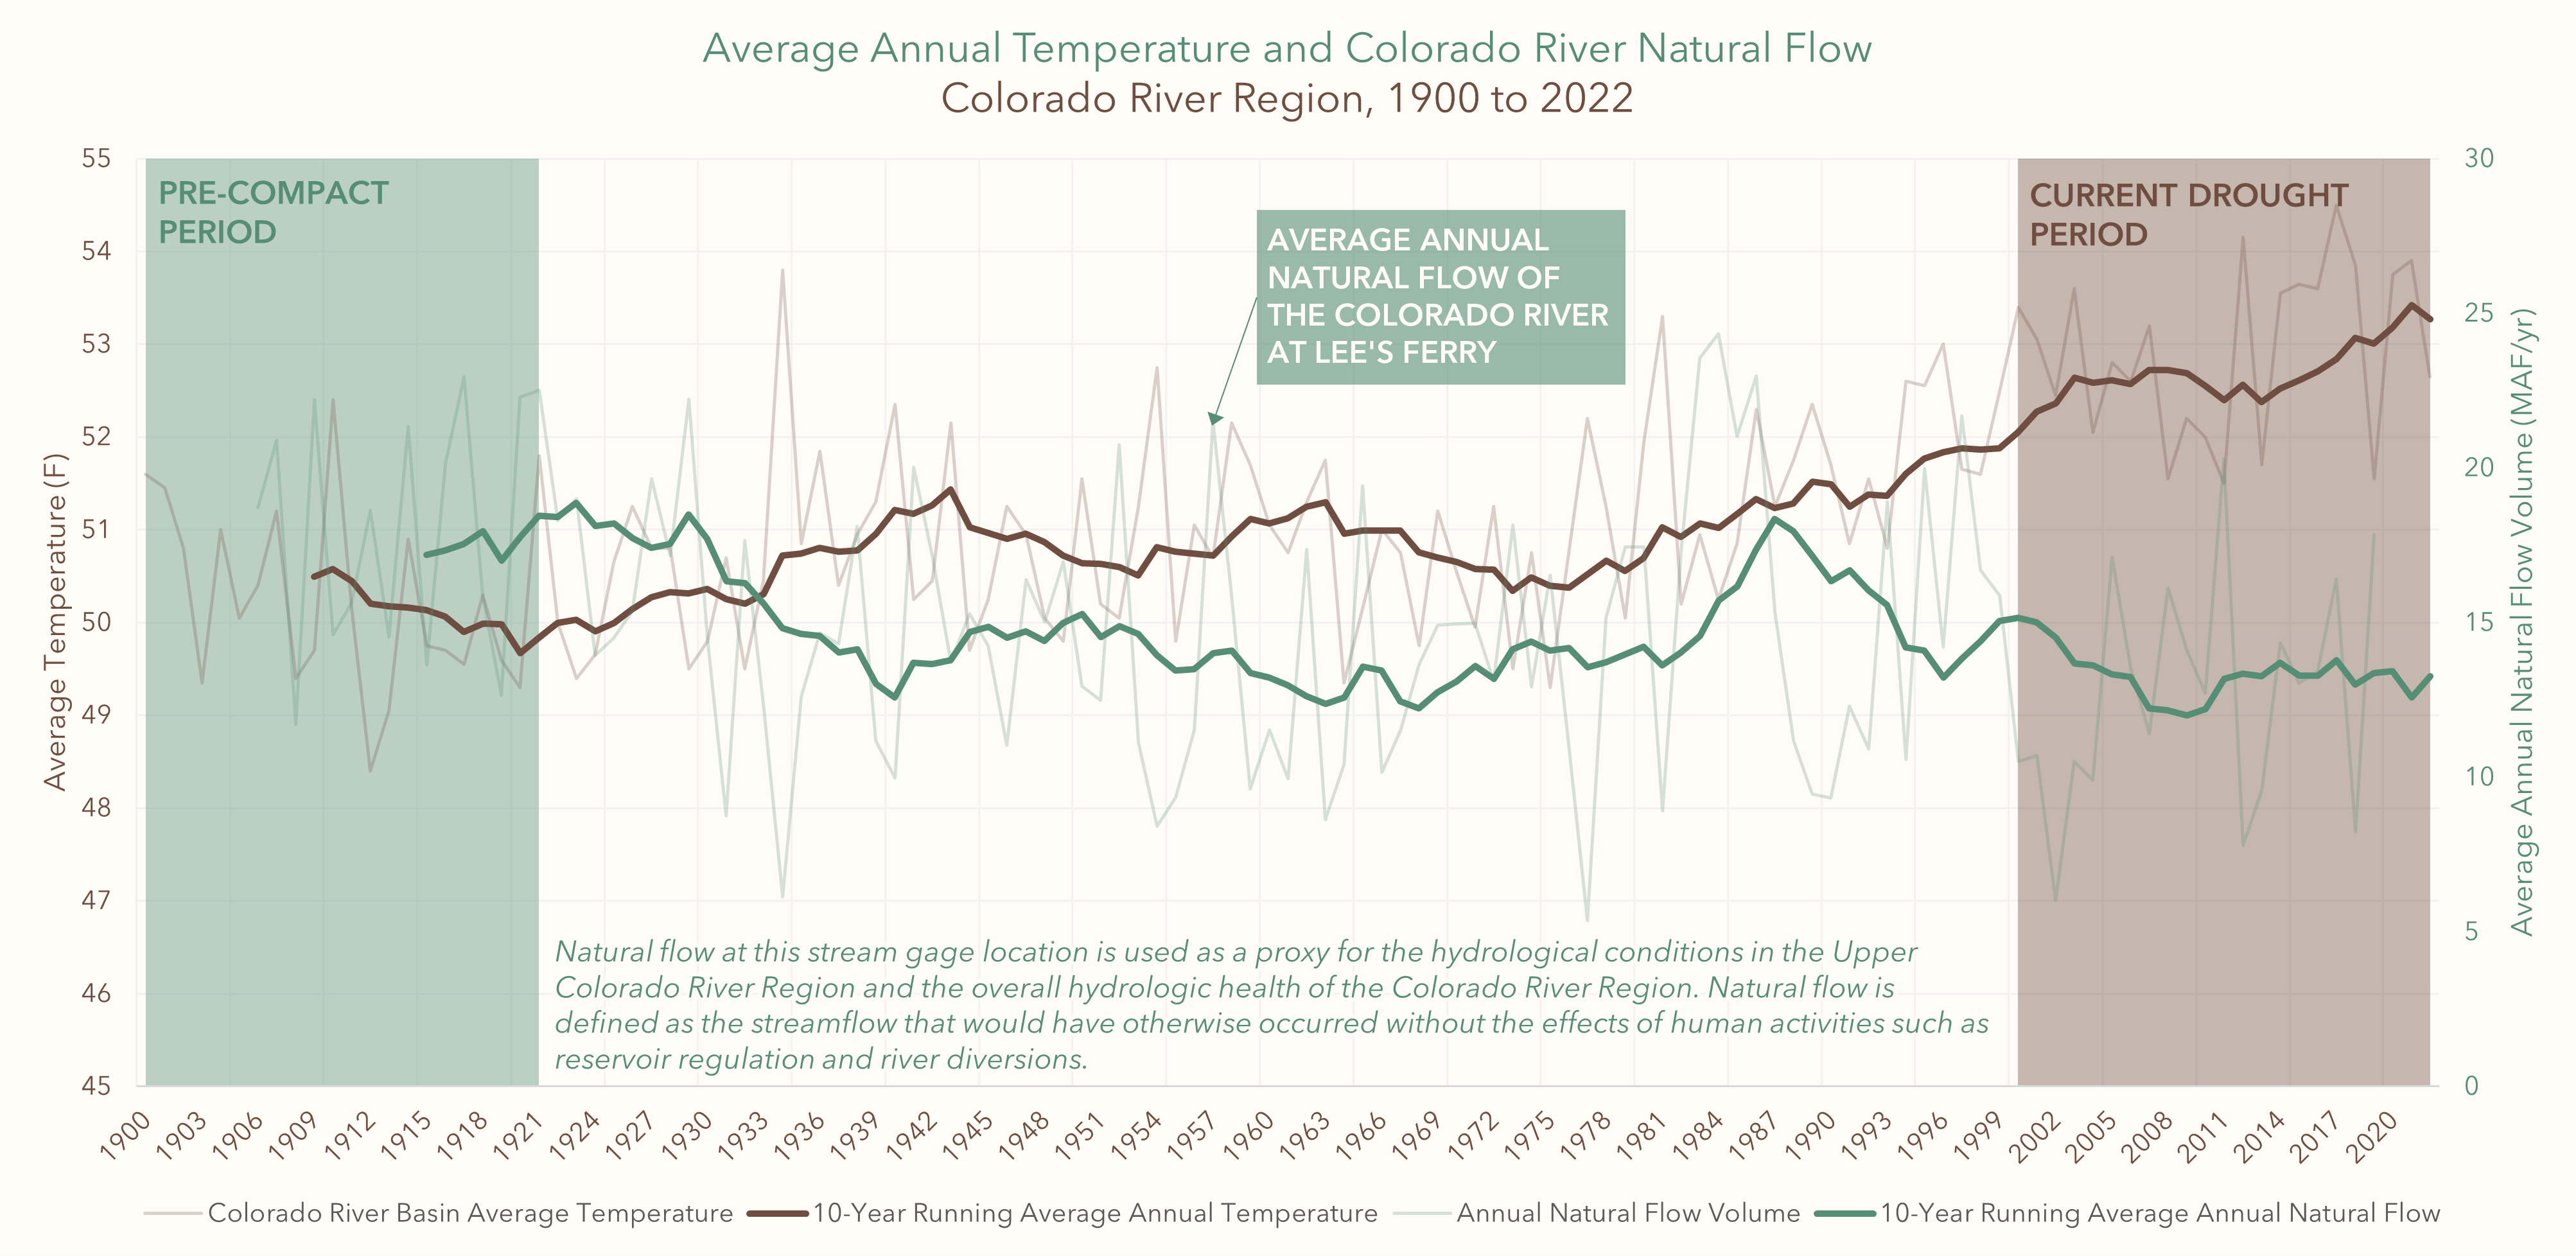 A themed graph of average annual temperature and Colorado River natural flow from 1900 to 2022